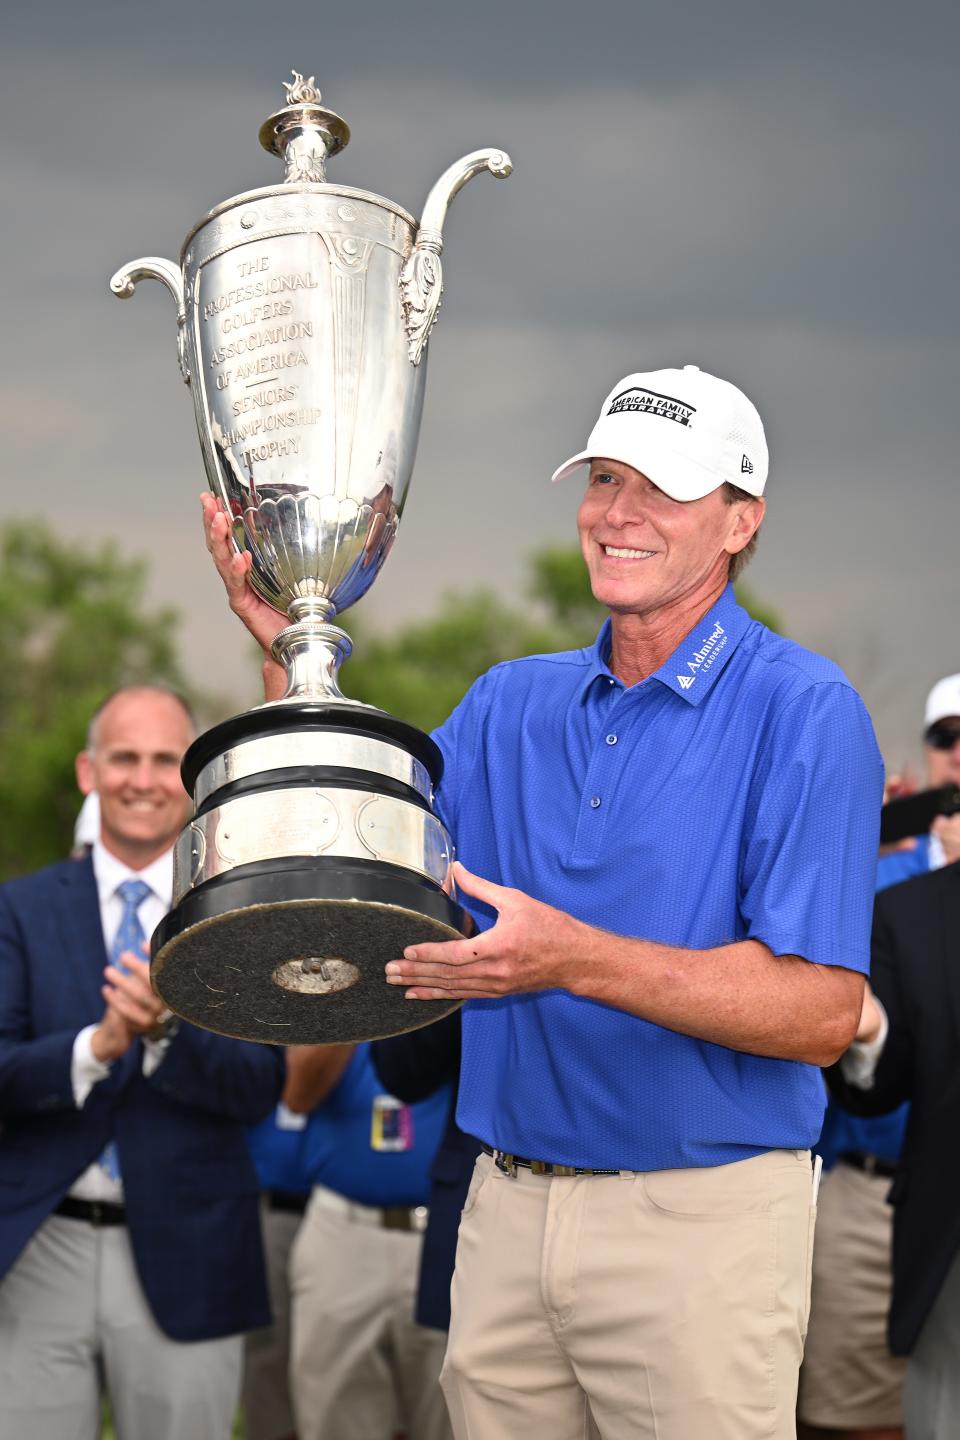 FRISCO, TEXAS - MAY 28: Steve Stricker of the United States poses with the Alfred S. Bourne Trophy during the final round of the KitchenAid Senior PGA Championship at Fields Ranch East at PGA Frisco on May 28, 2023 in Frisco, Texas. (Photo by Orlando Ramirez/Getty Images)